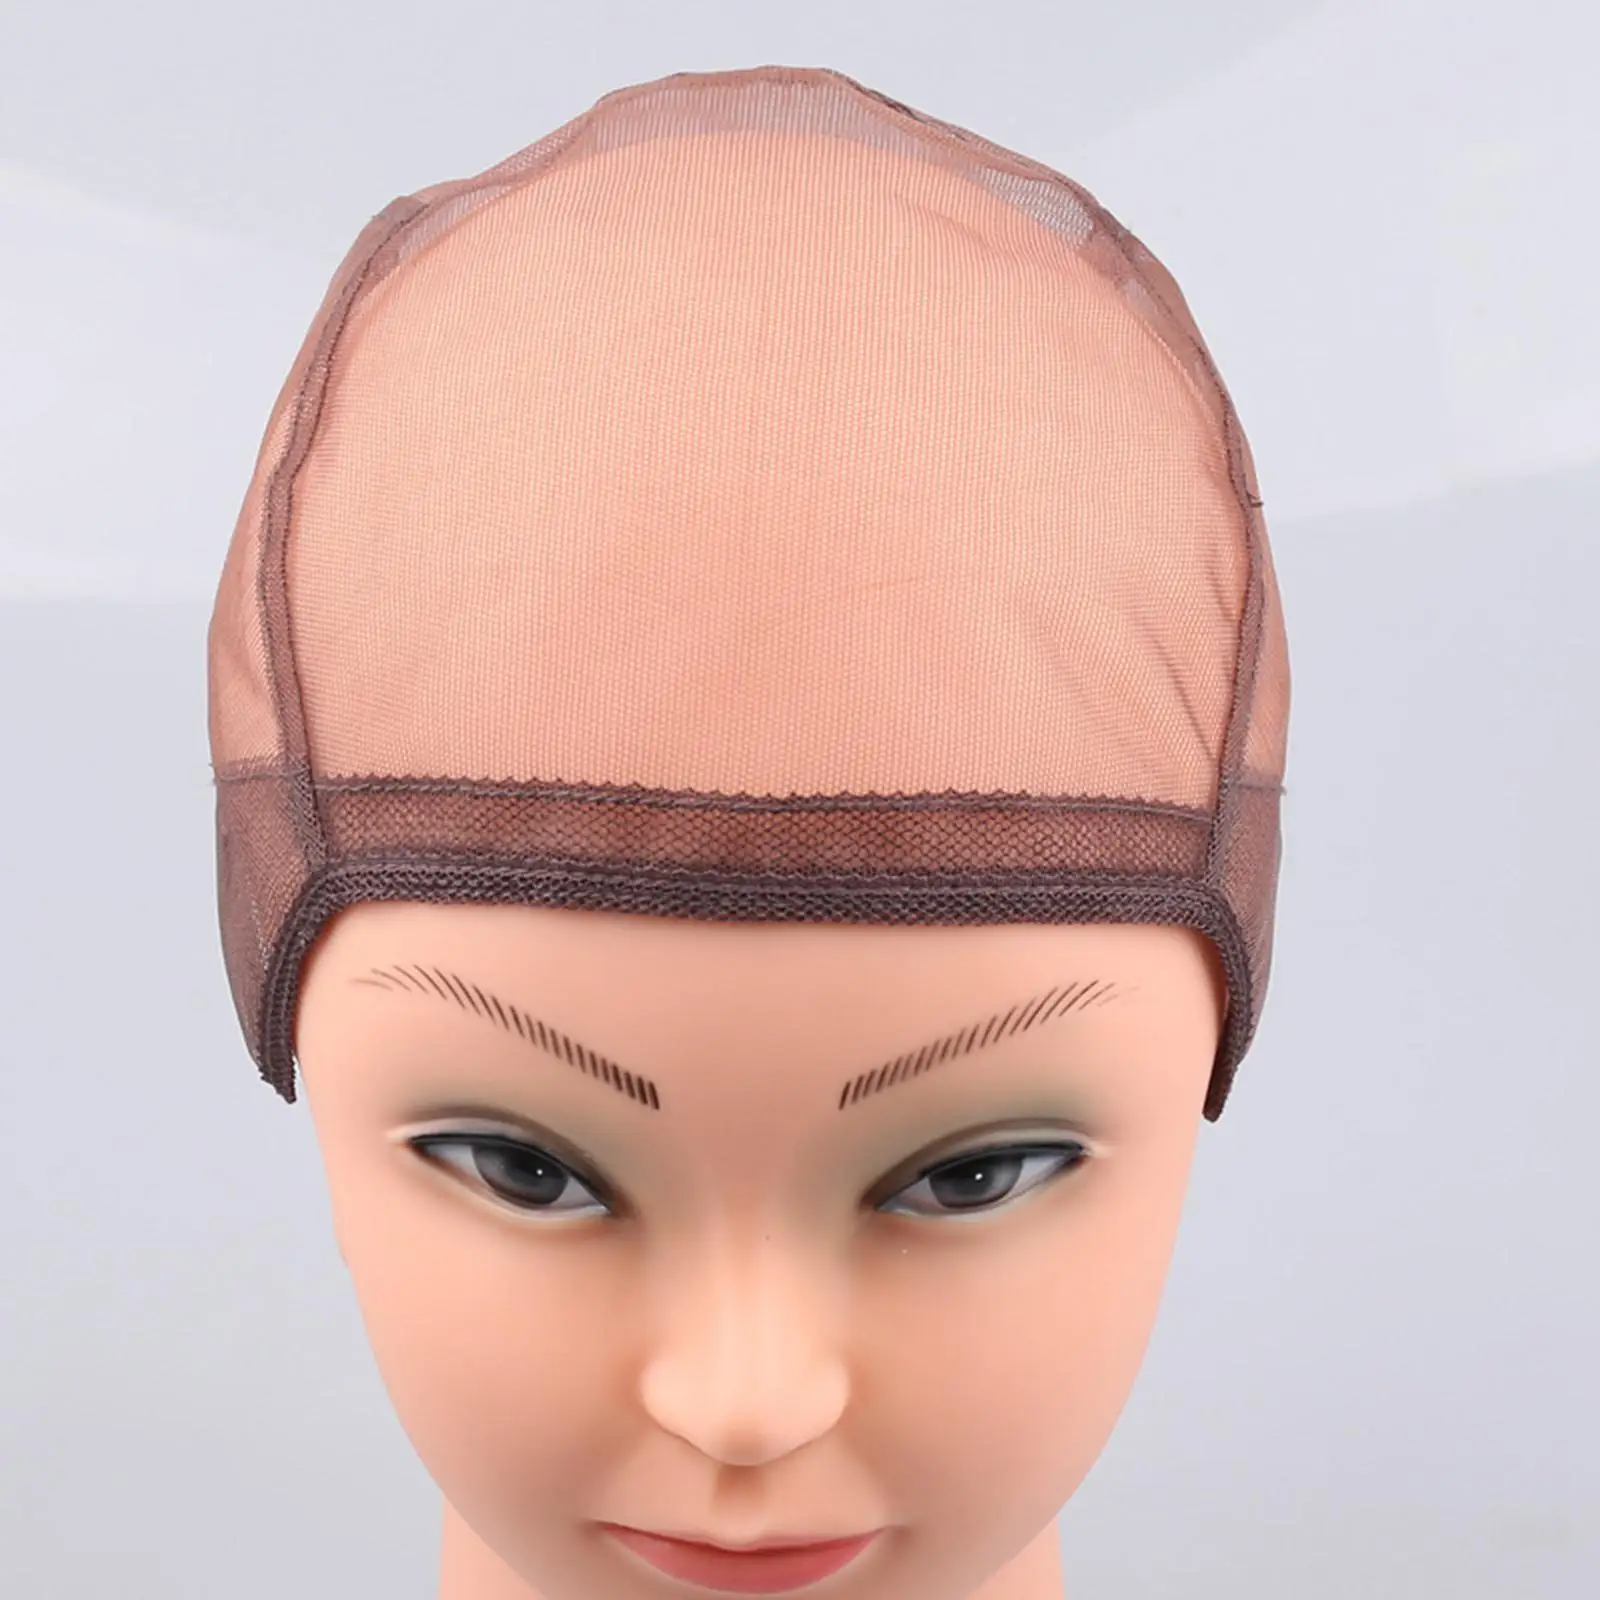 Wig Hat Soft Hair Net with Elastic Band for Weaving Hair Durable Dome Style Comfortable wearing Wig Accessories Net Wig Hat